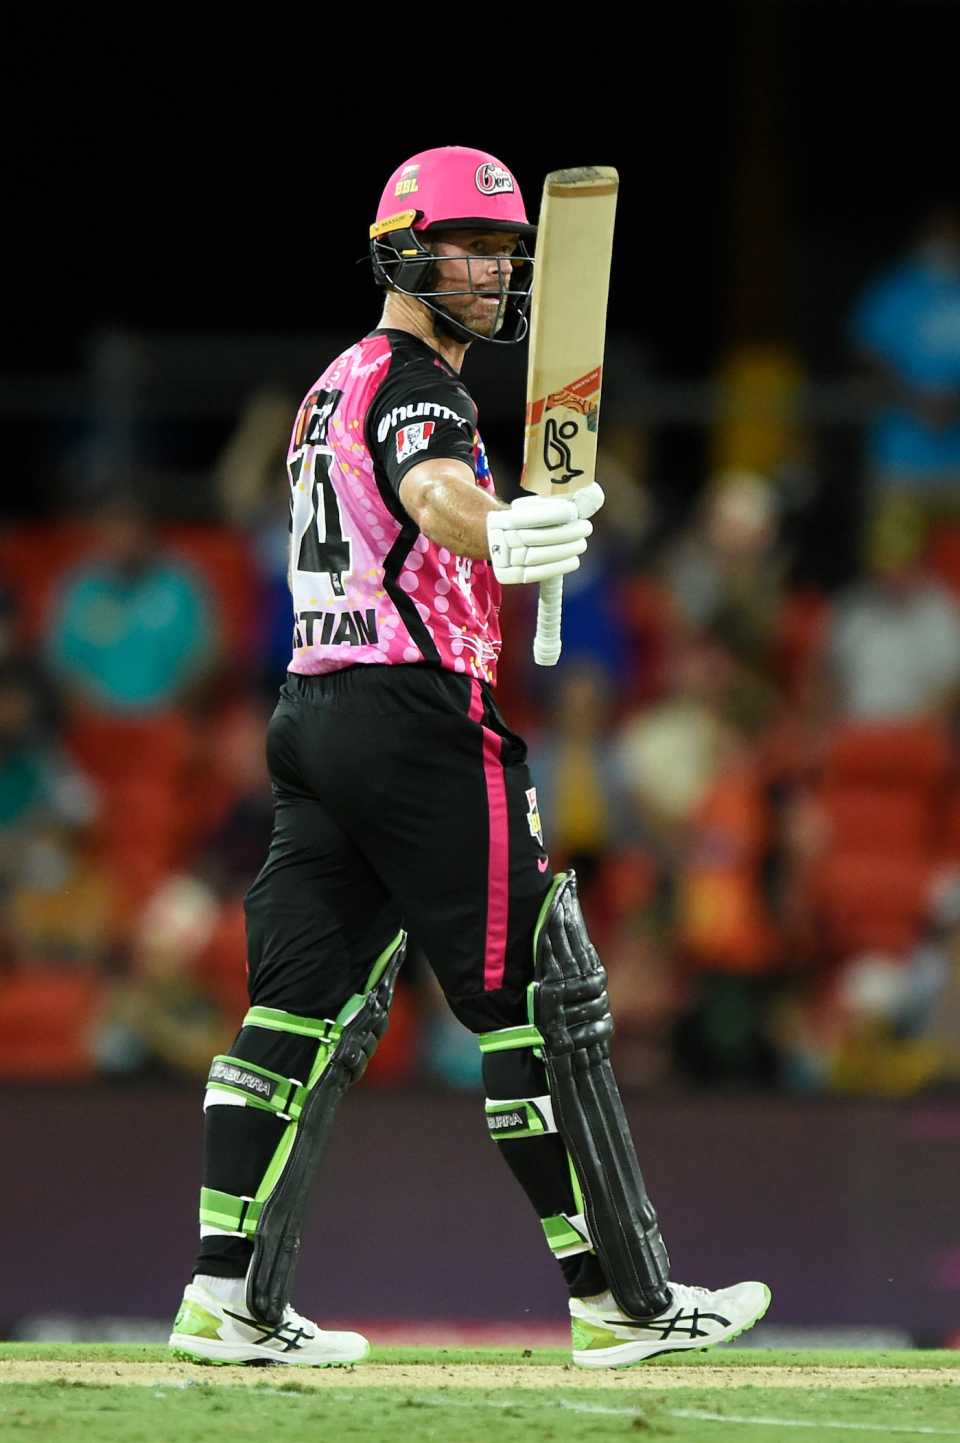 Dan Christian led the Sixers chase with a 61-ball 73